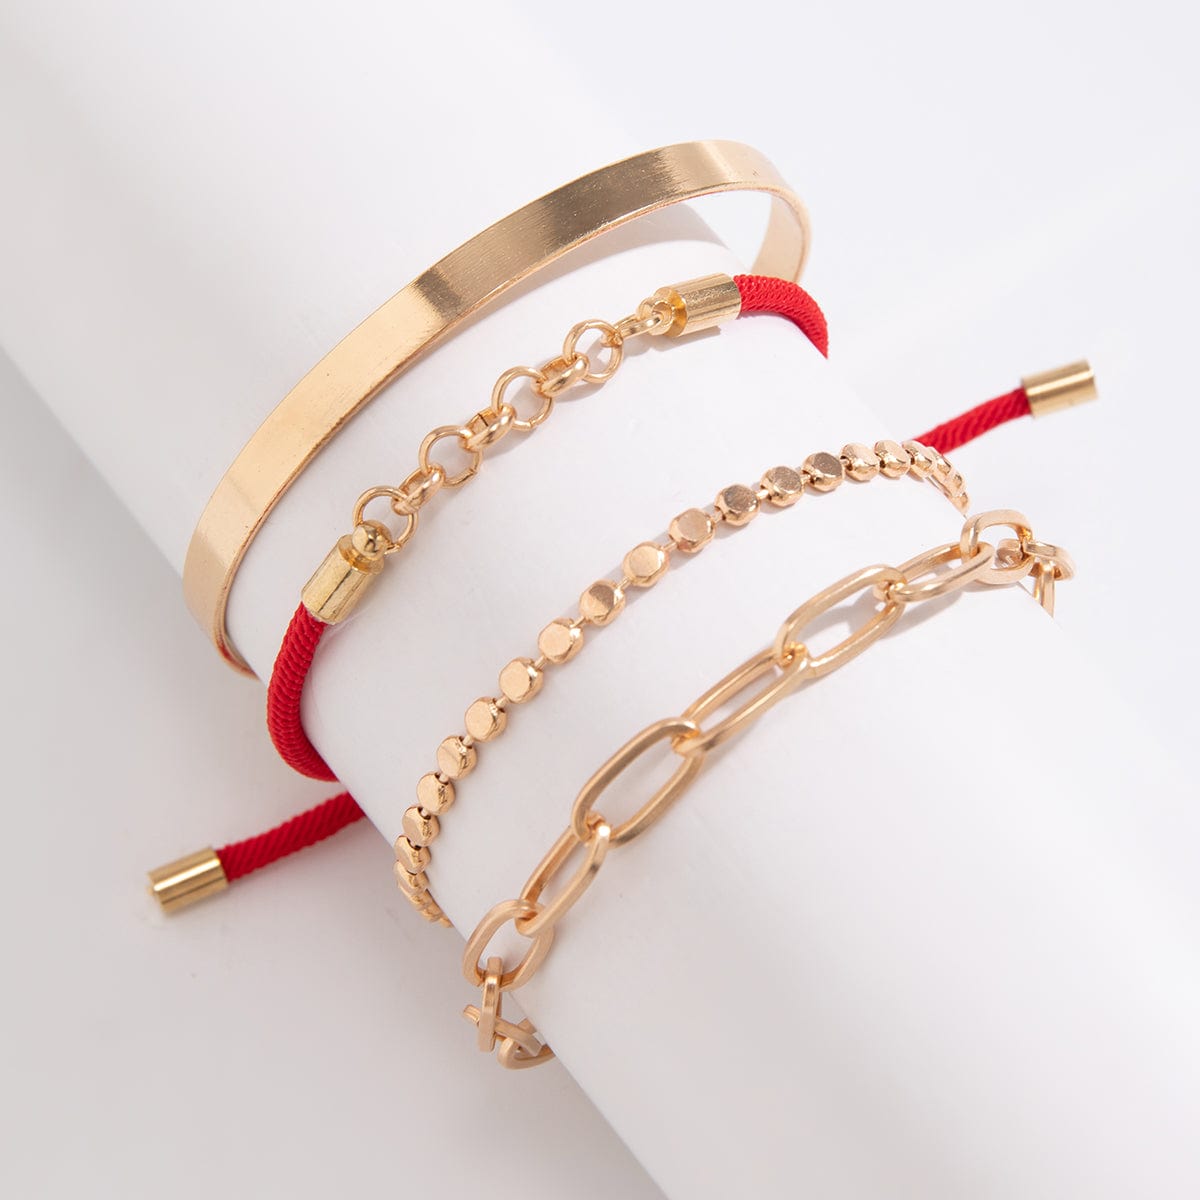 Trendy Layered Knotted String Cable Chain Bangle Bracelet Set - ArtGalleryZen